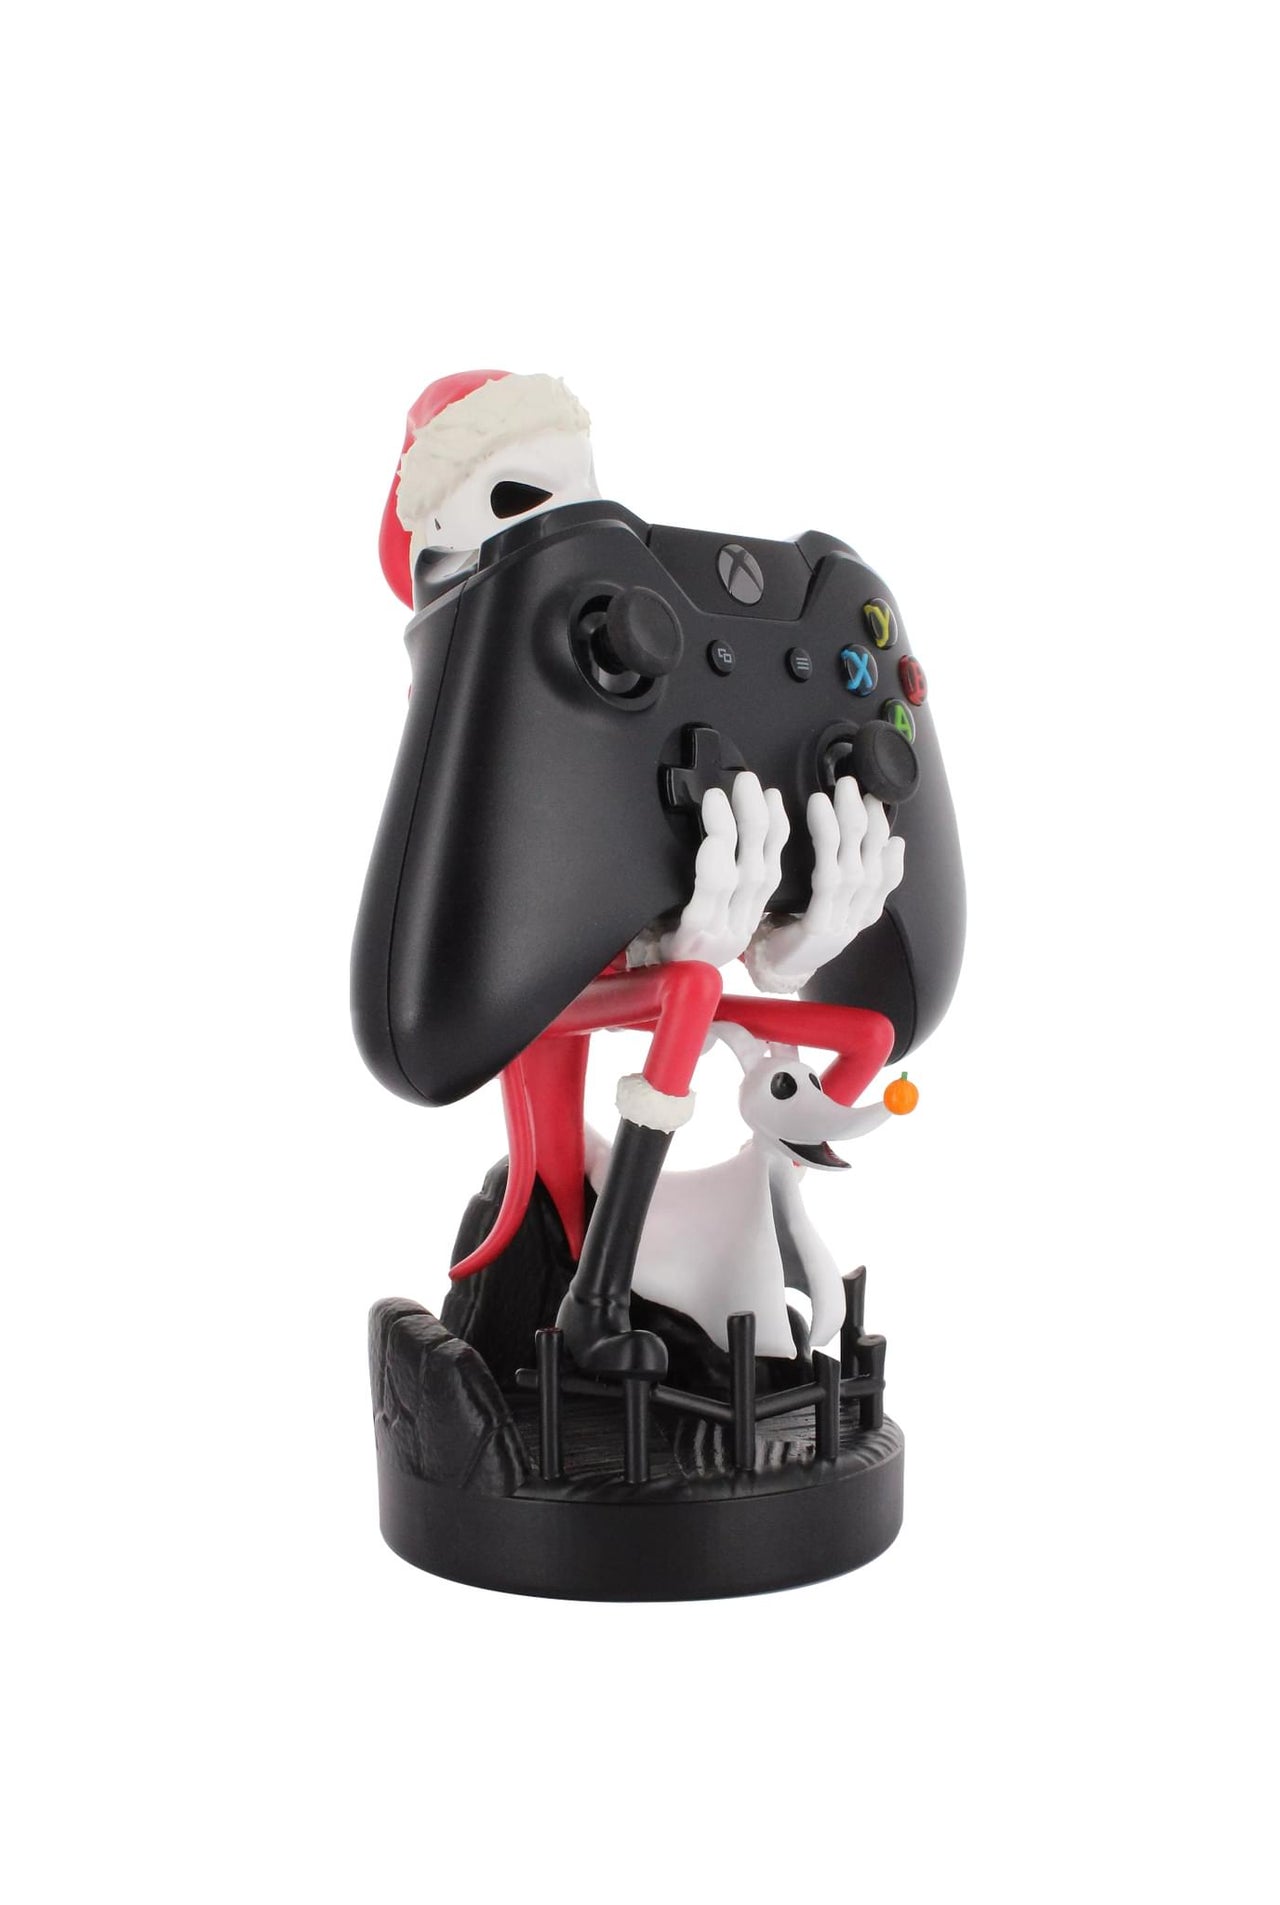 The Nightmare Before Christmas: Jack Skellington In Santa Suit Cable Guys Original Controller and Phone Holder - EXG Pro